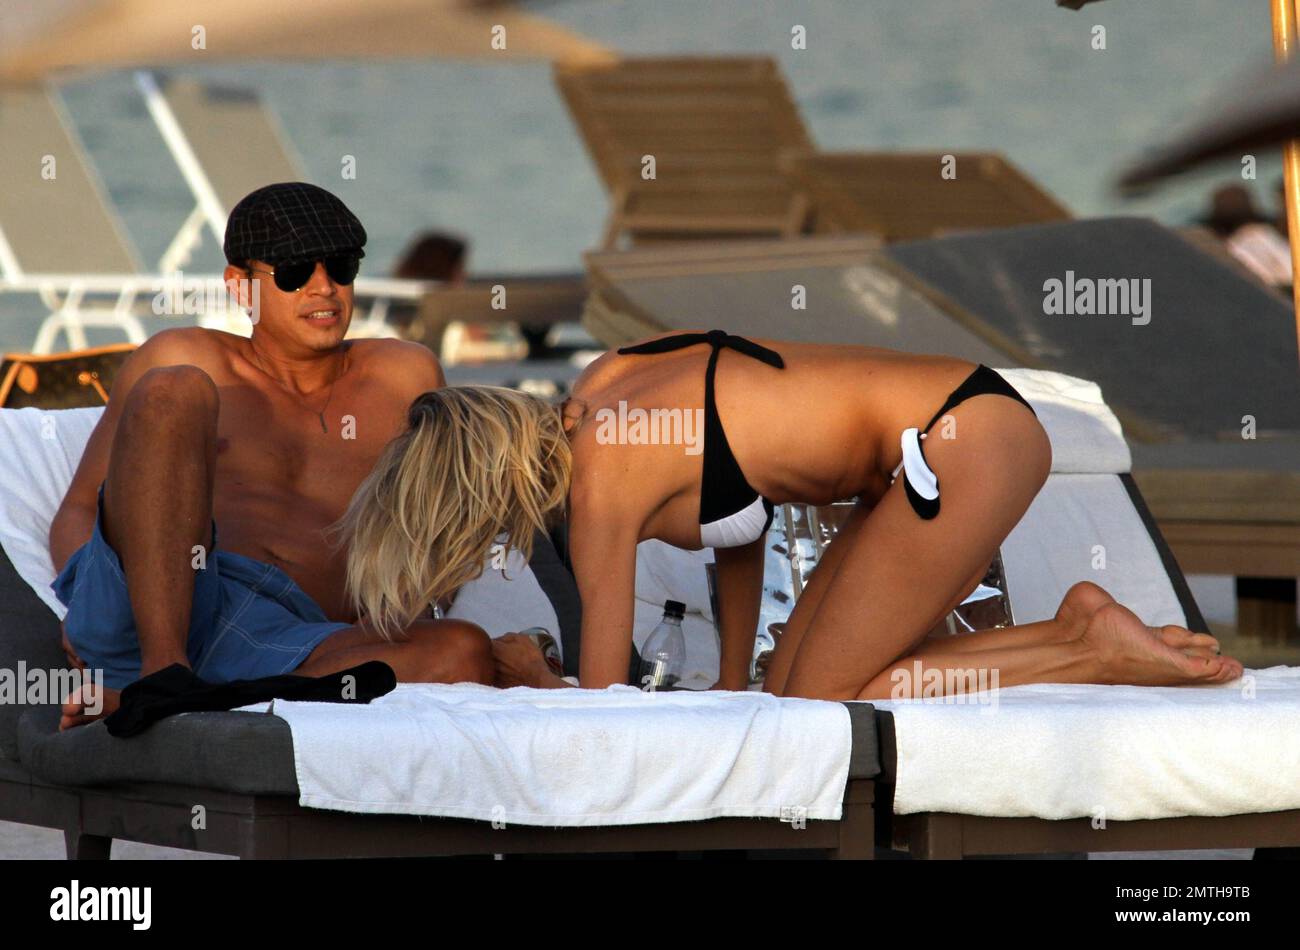 Rita Rusic and her handsome male companion spend an afternoon at the beach ahead of Christmas. Rita, an Italian-Croatian actress, displayed an amazing bikini figure despite being 51 years old. Rusic was also wearing a huge diamond ring on her left hand. Miami Beach, FL. 23rd December 2011. Stock Photo